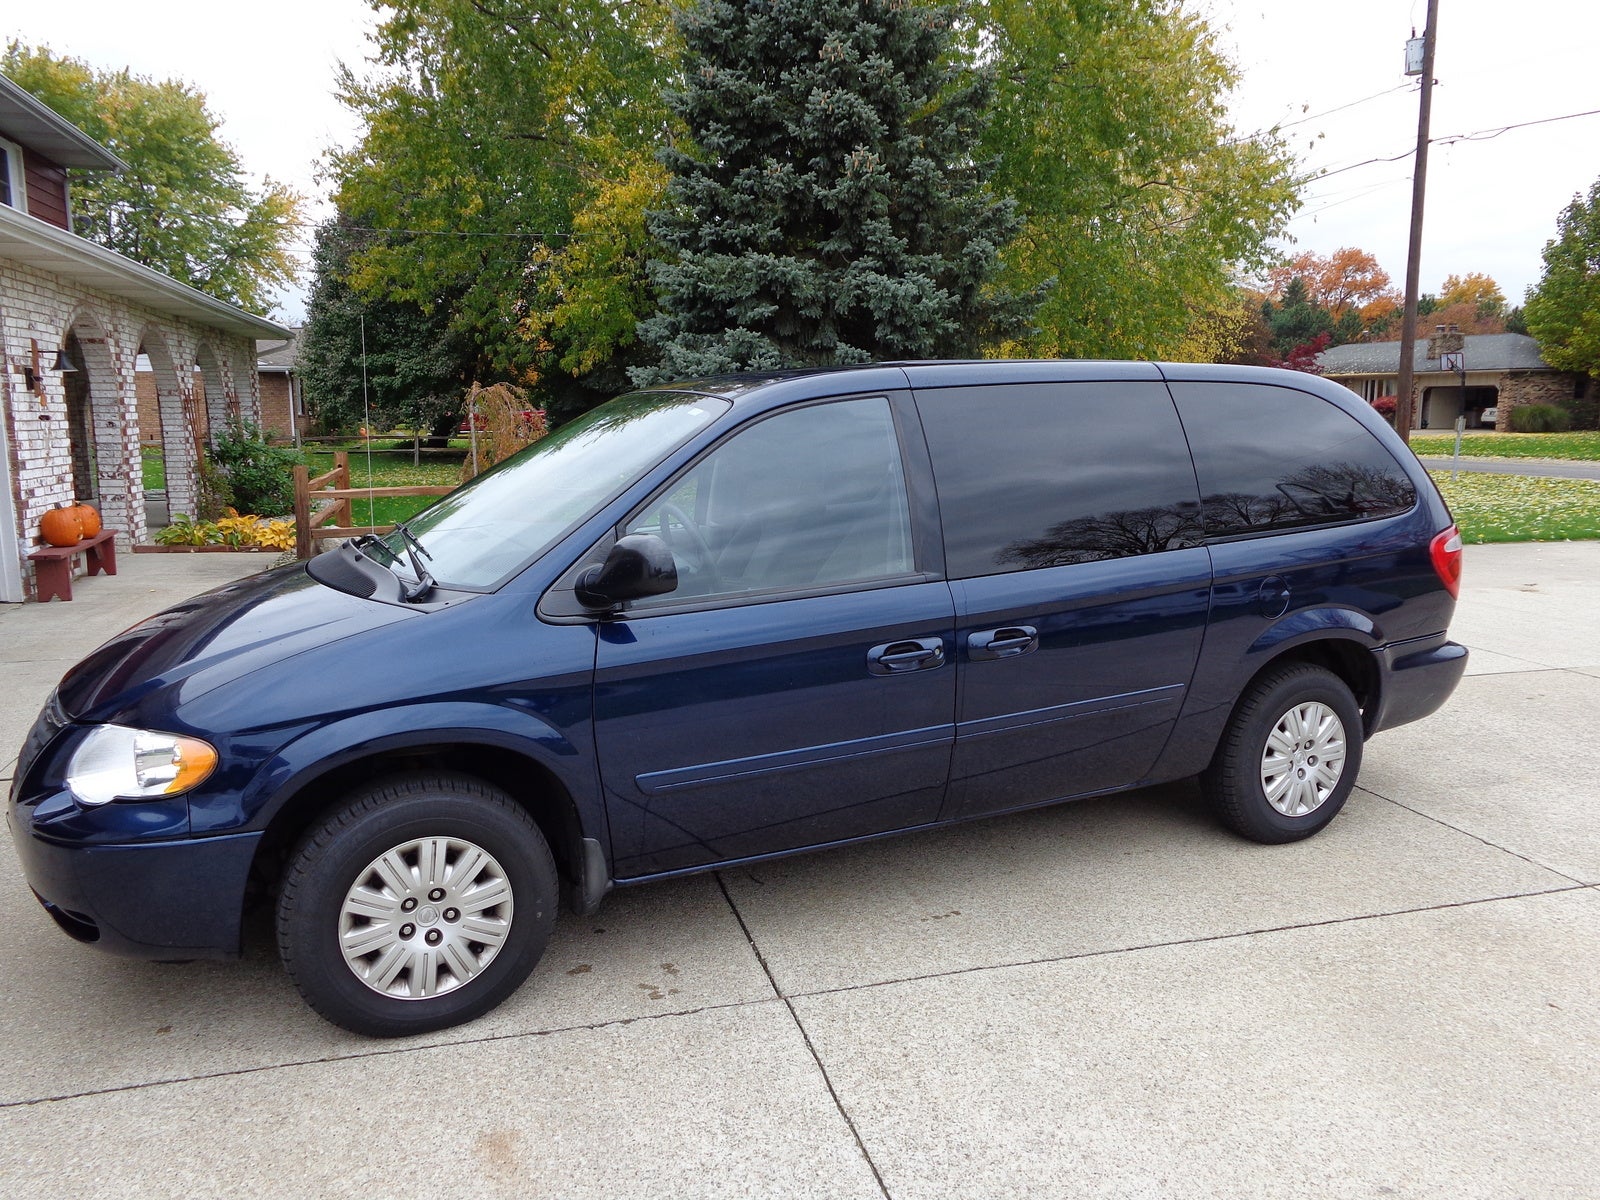 2006 Chrysler Town & Country Pictures CarGurus